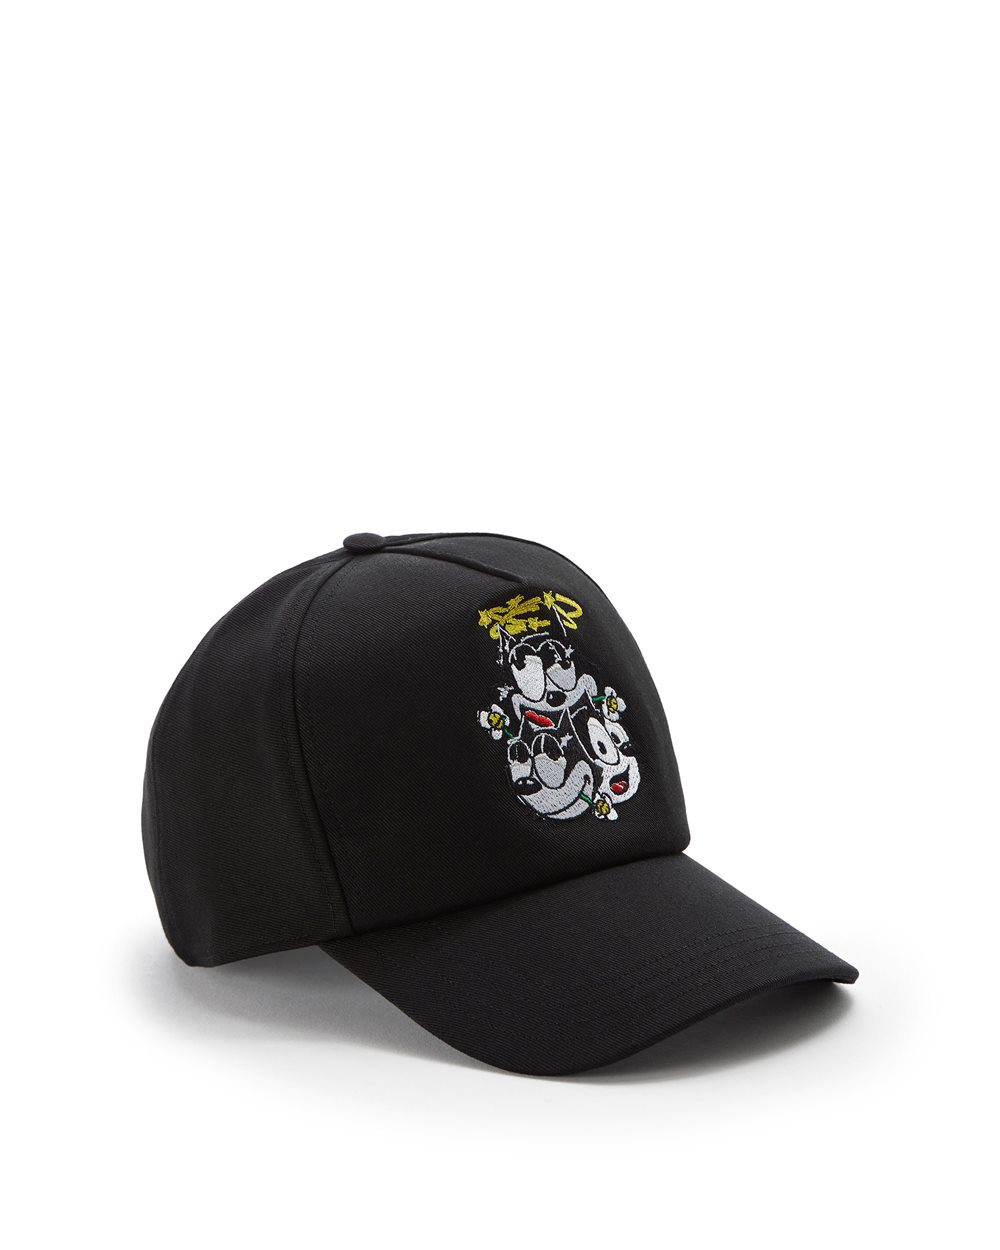 Baseball hat with cartoon graphics and logo - VAMEE SELECTION | Iceberg - Official Website